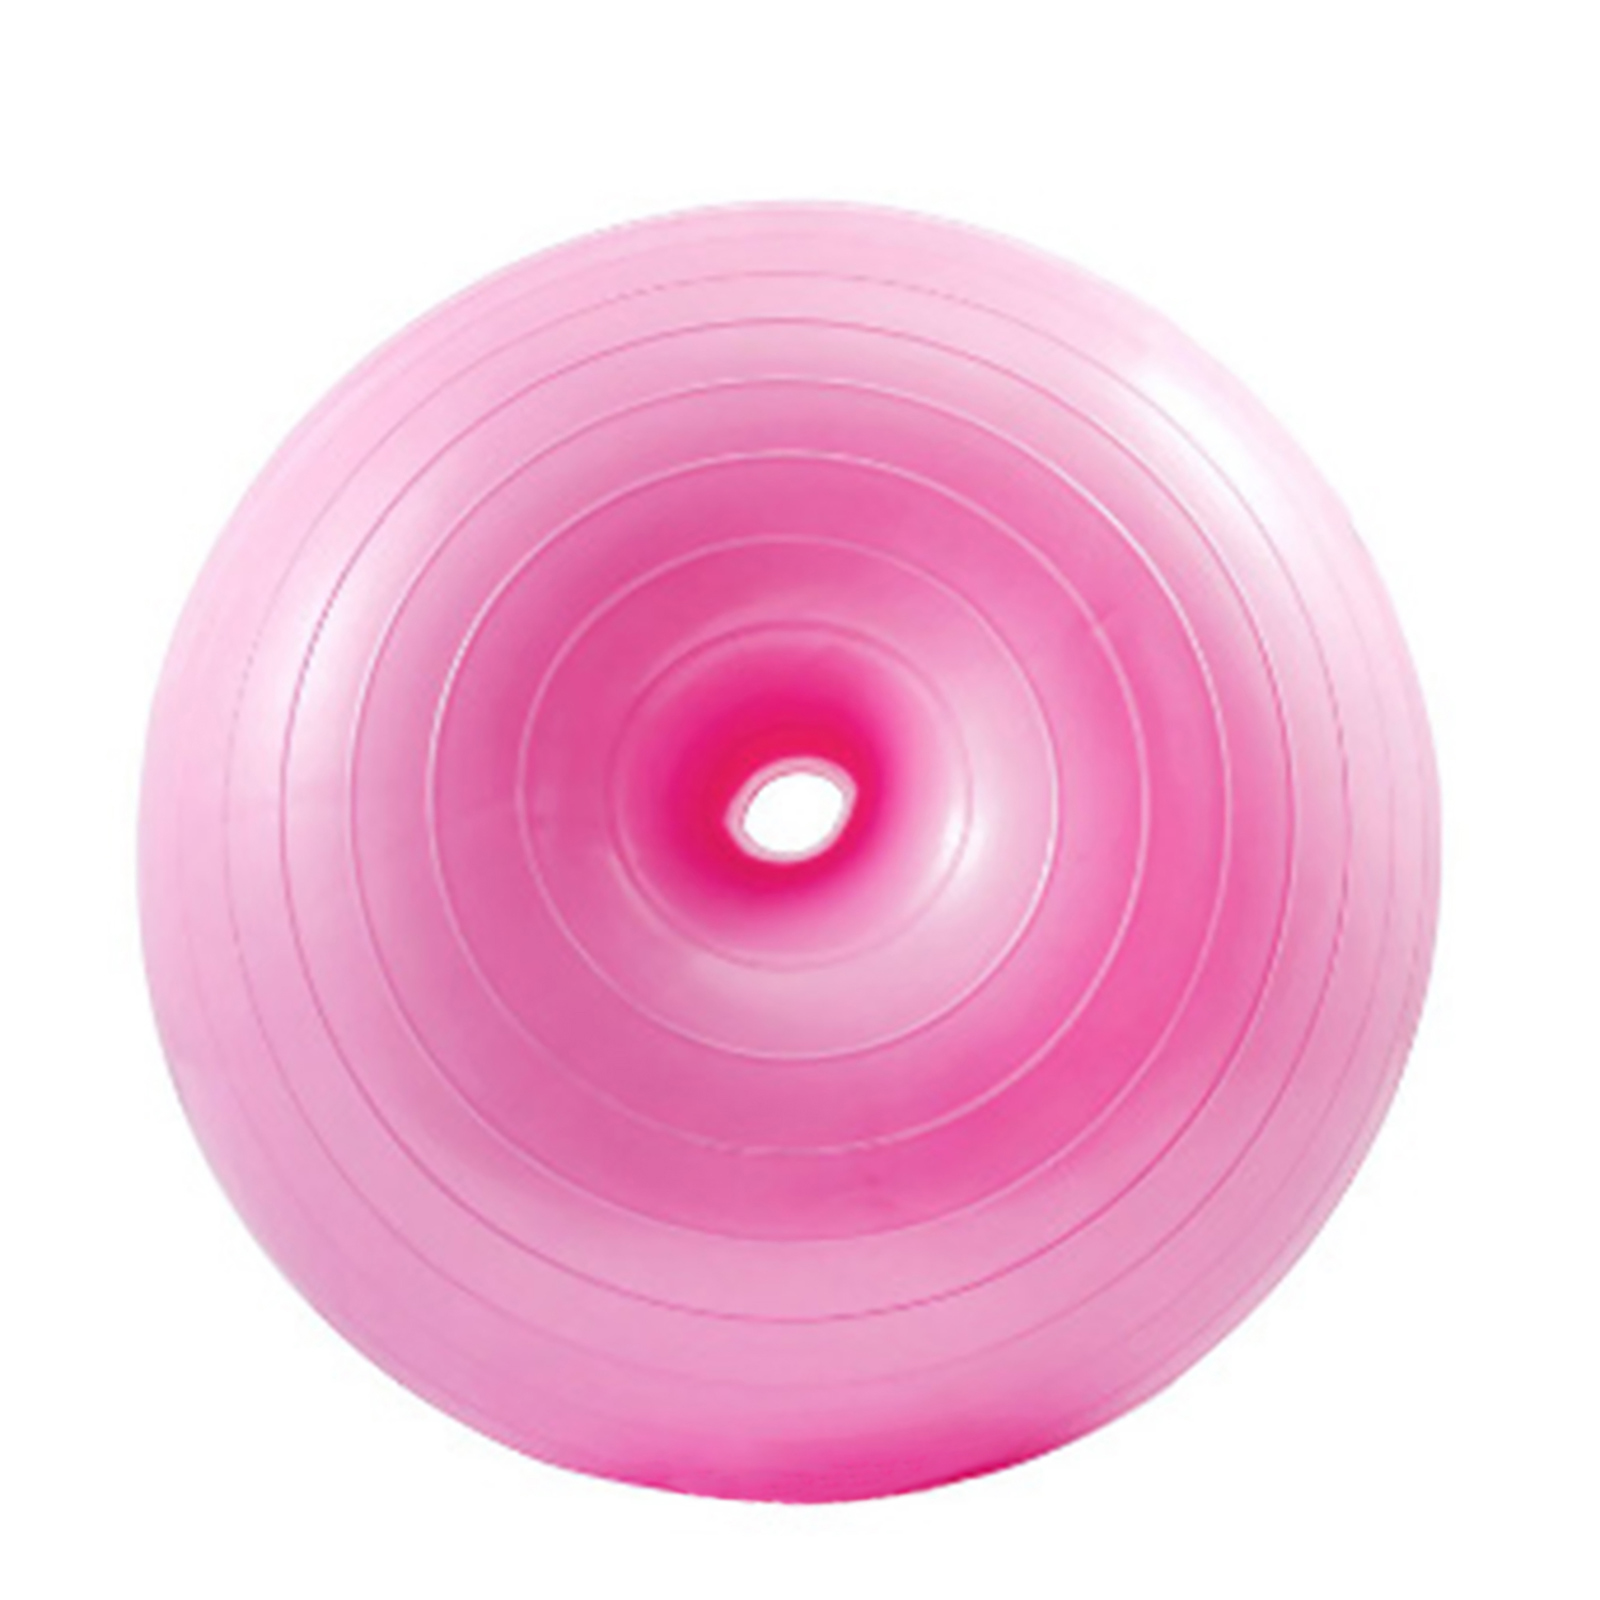 Donut Exercise Ball Workout Core Training Ball Swiss Stability Ball For Yoga Pilates Balance Training In Gym Office Classroom 50cm